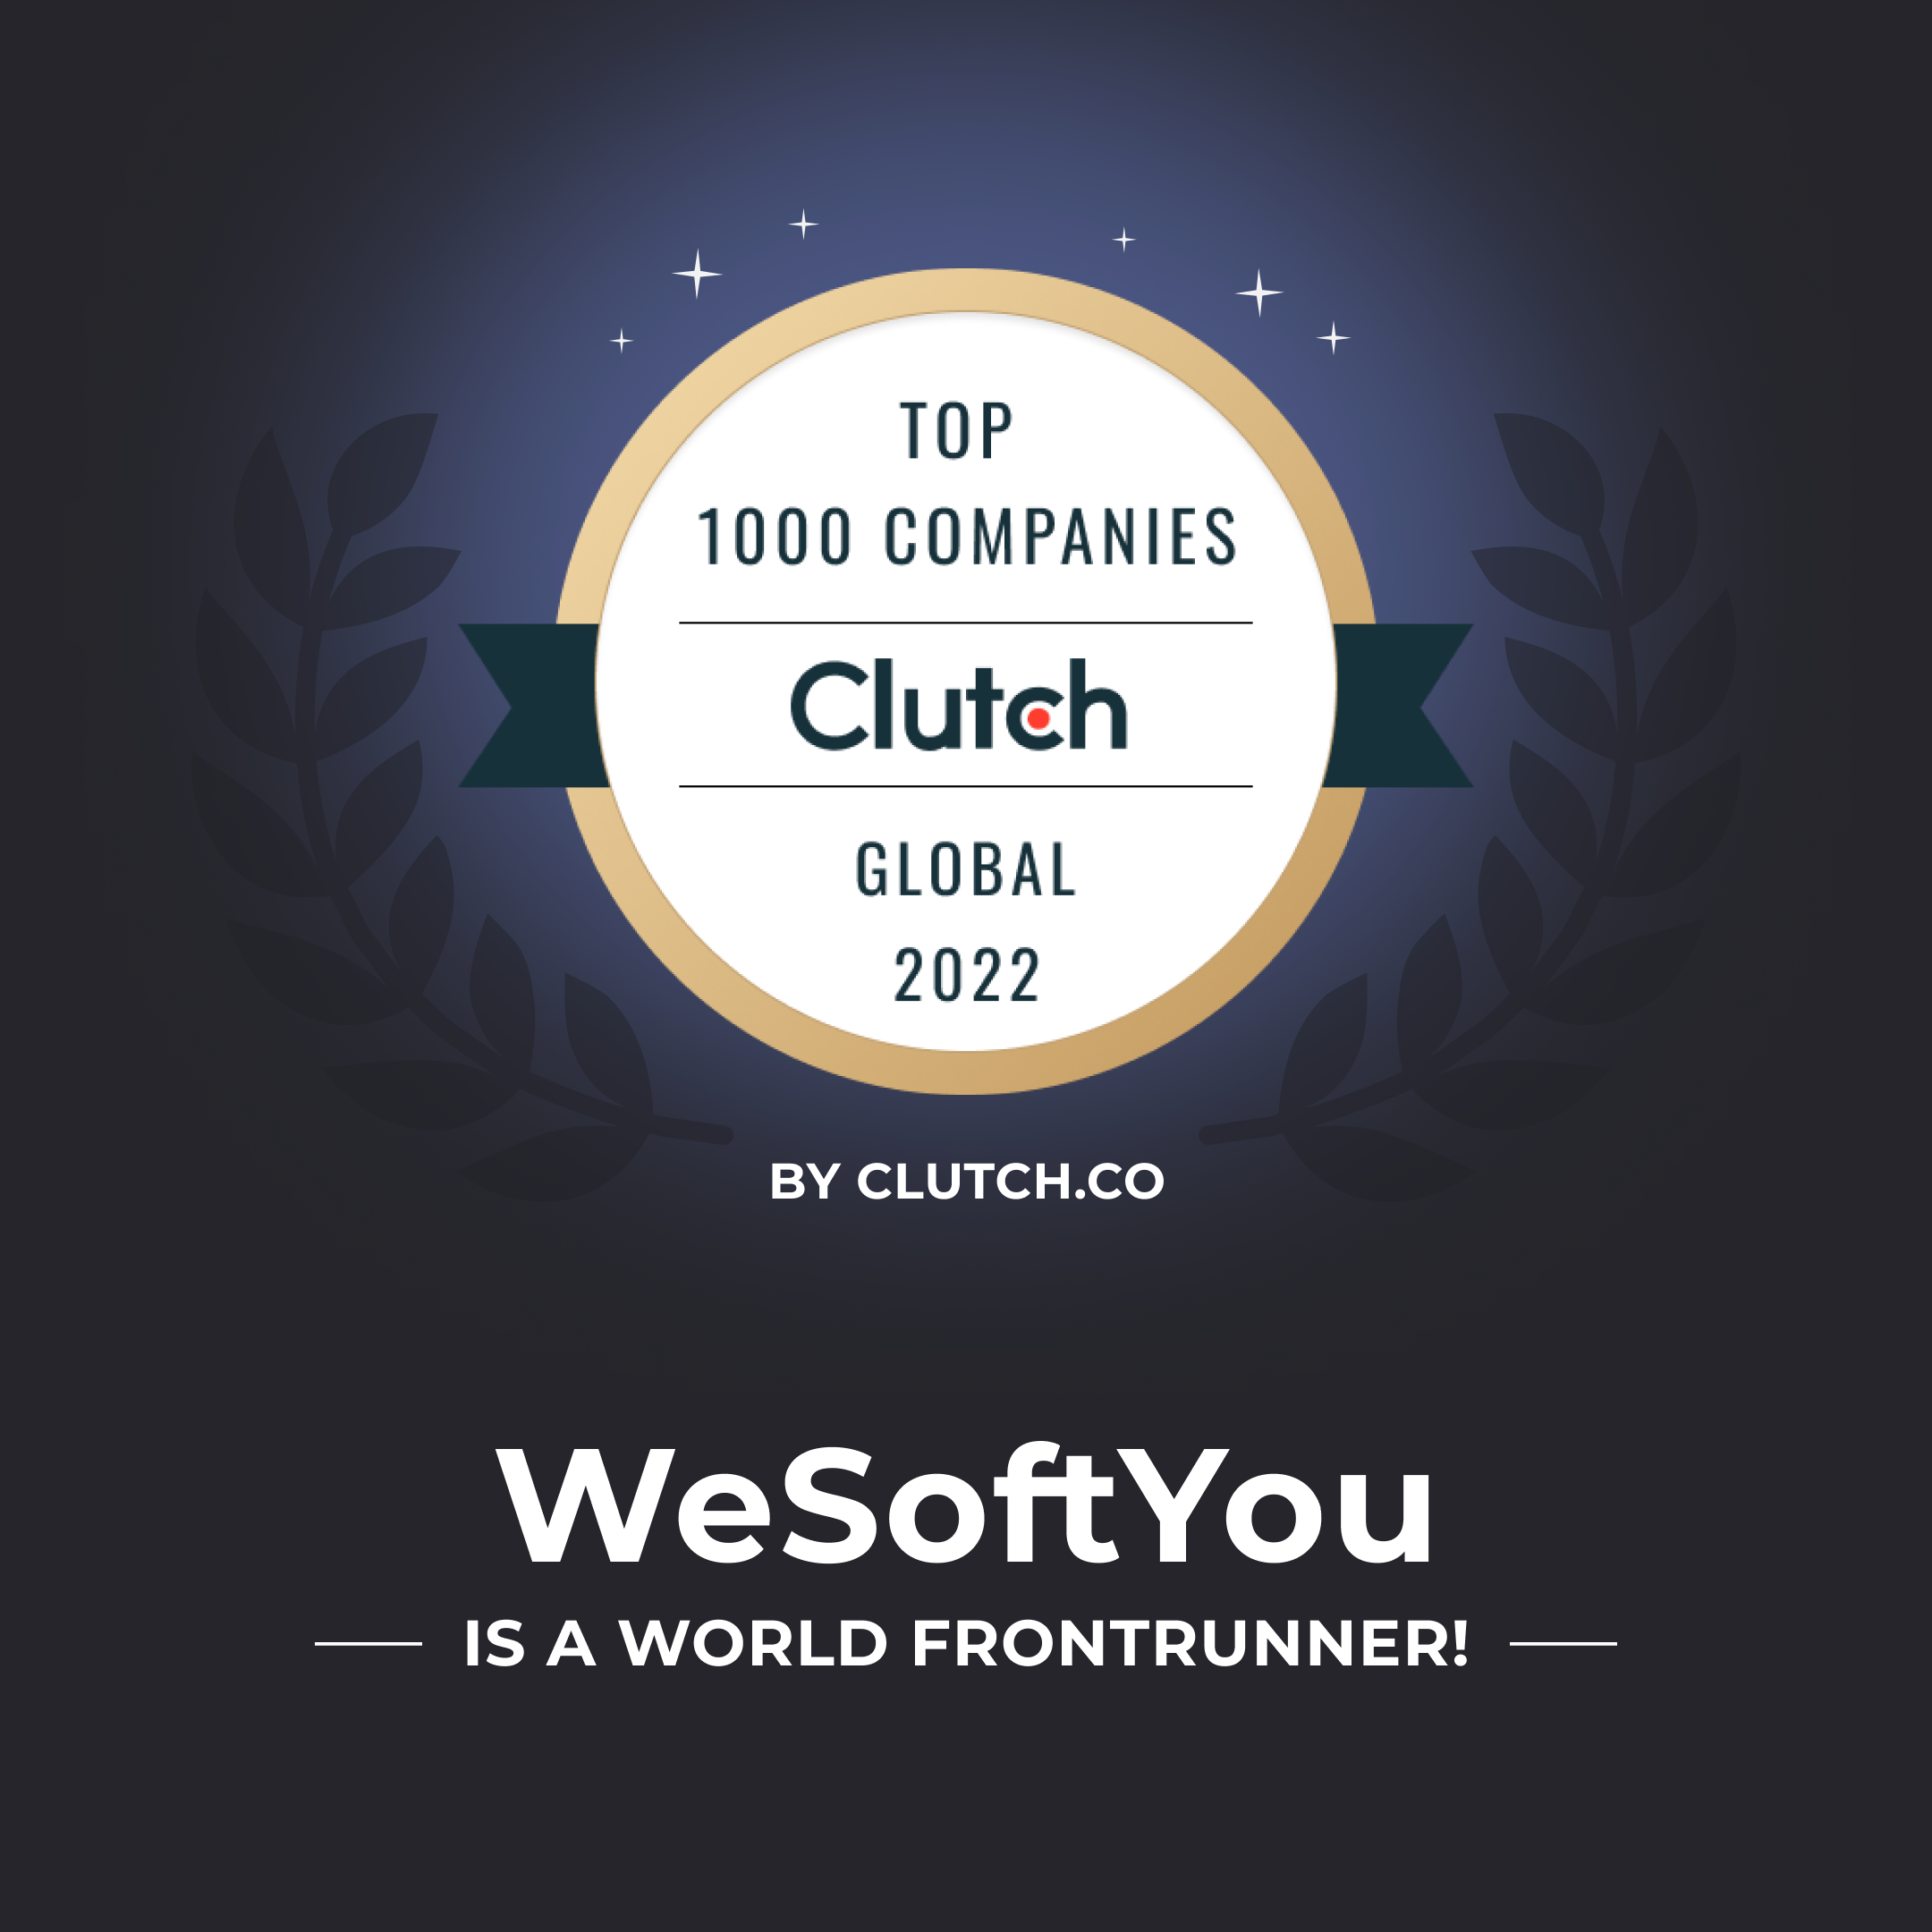 WSU is a world Frontrunner – Top 1% in the world by Clutch, image #8